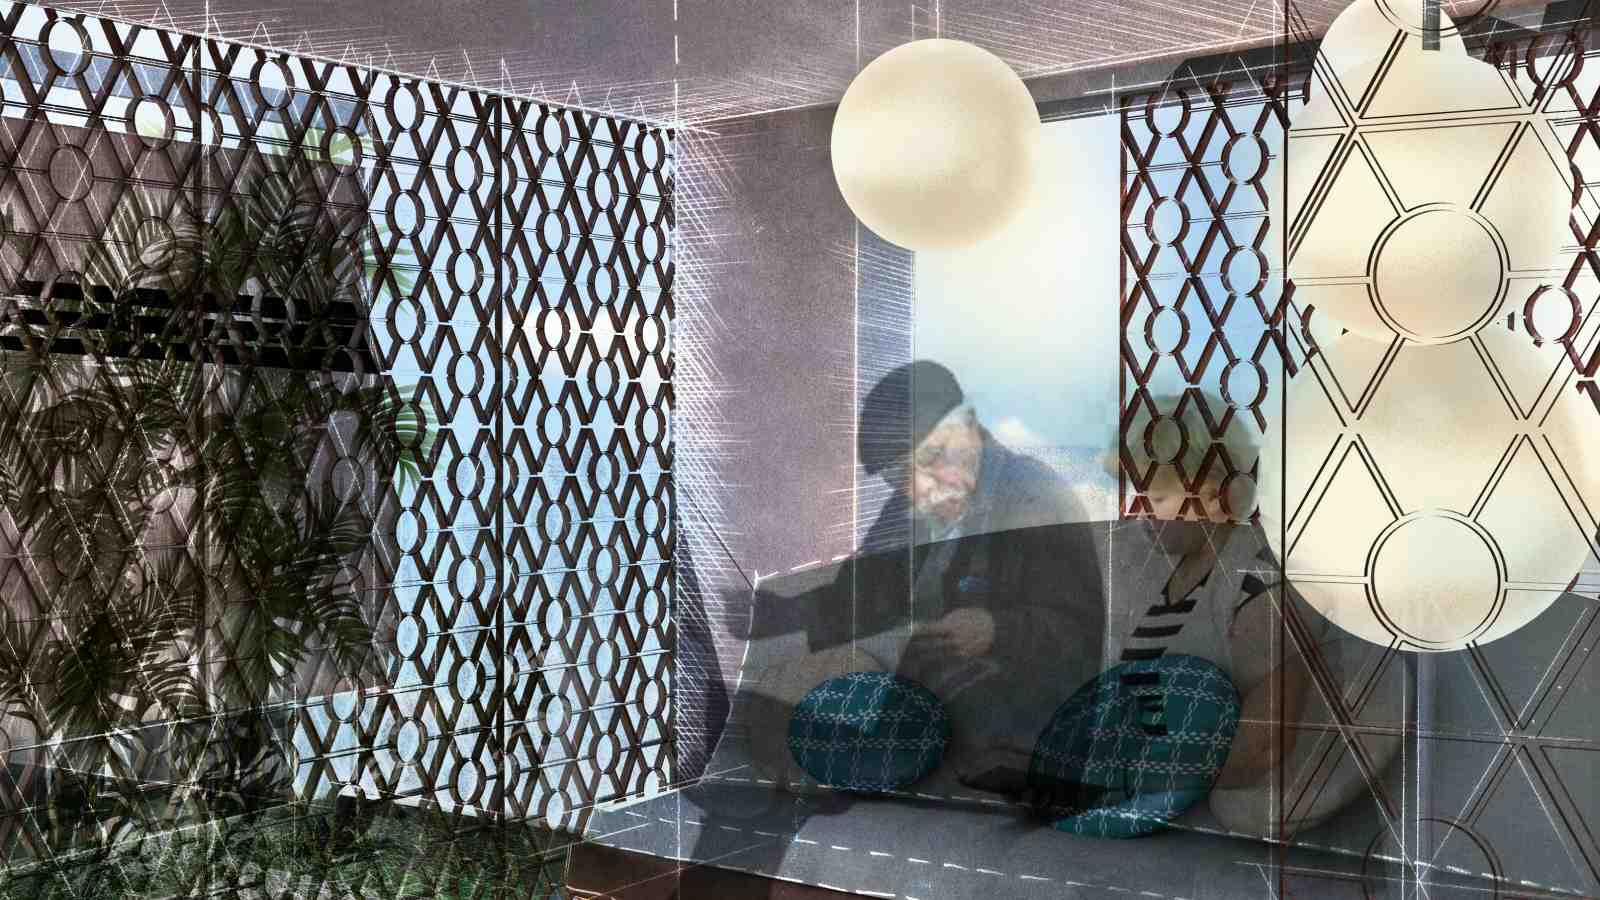 Computer generated image showing two elderly people sitting in their living room reading the paper, in the back and foreground mashrabiya, lattice-like screens to enhance privacy, can be seen.